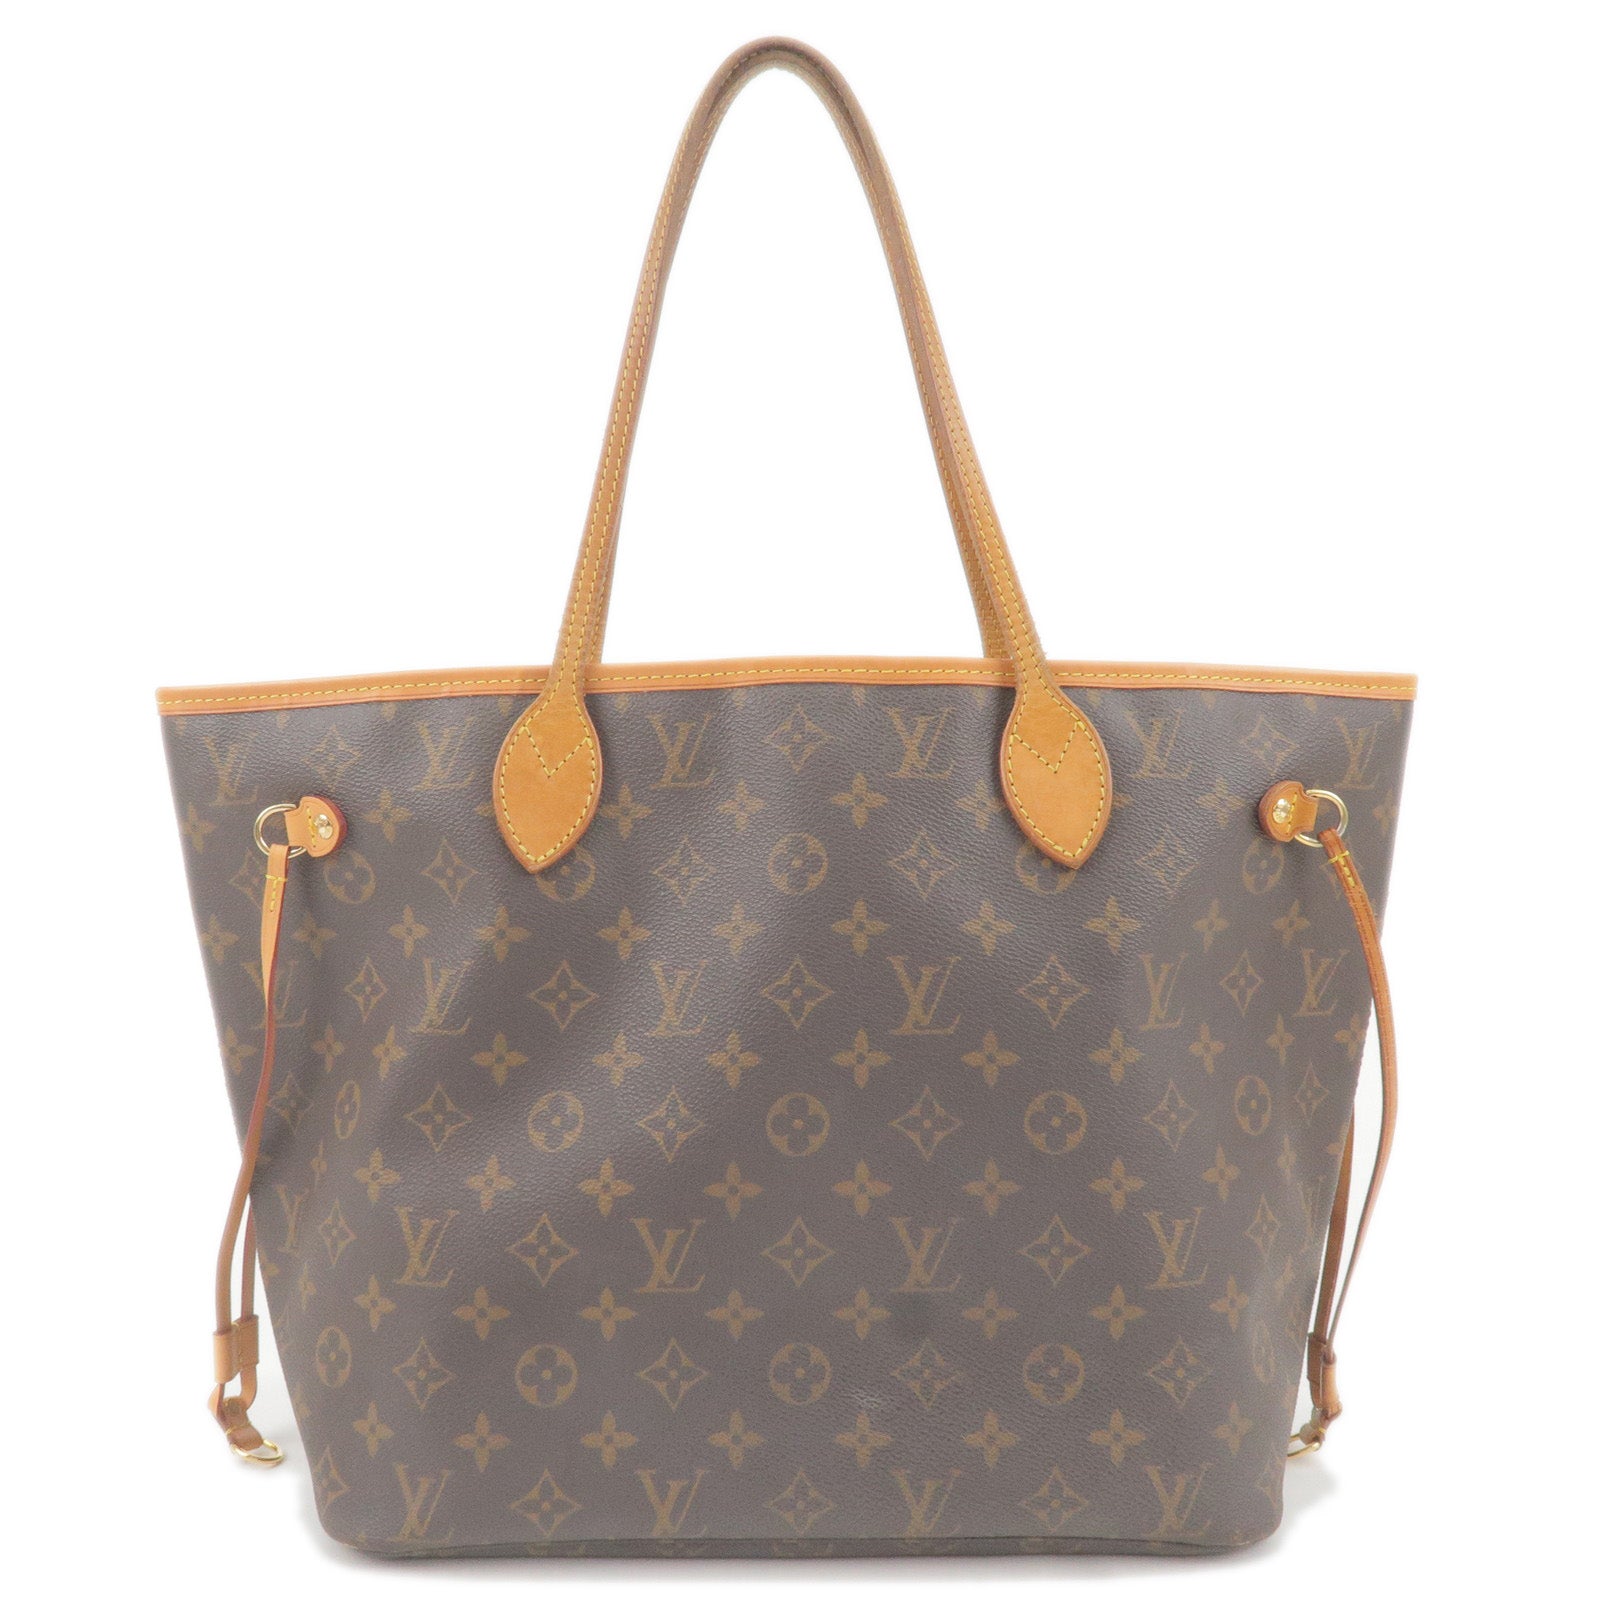 Louis Vuitton Handbags Totes Bags Neverfull, Size India